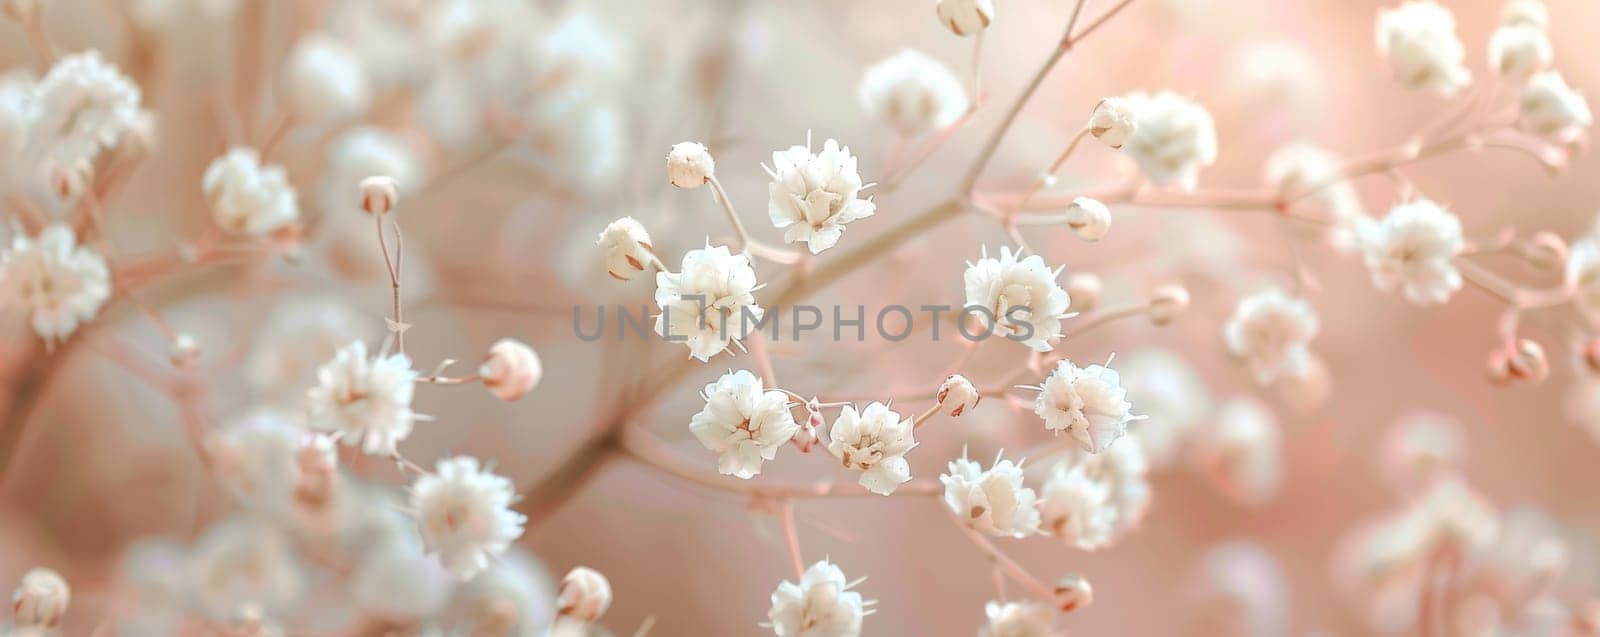 Delicate white gypsophila flowers with blurred pinkish background